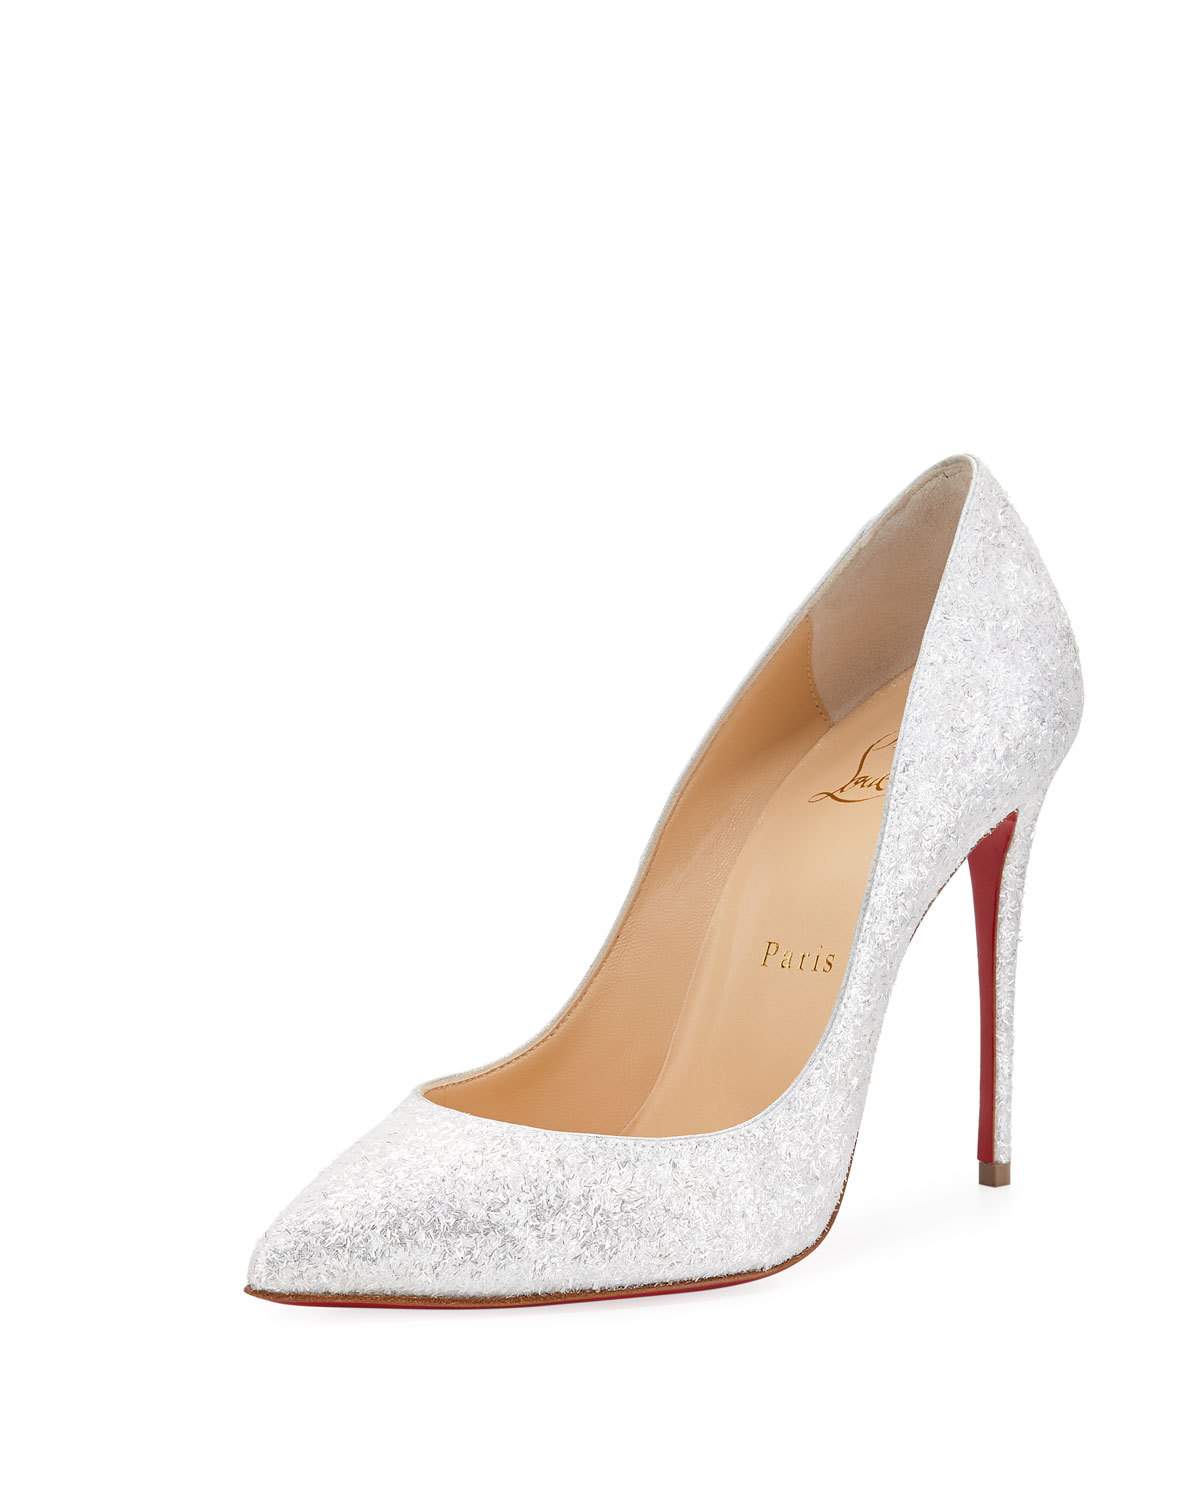 Pigalle Follies Glitter Red Sole Pumps by Christian Louboutin Designer Wedding Shoes